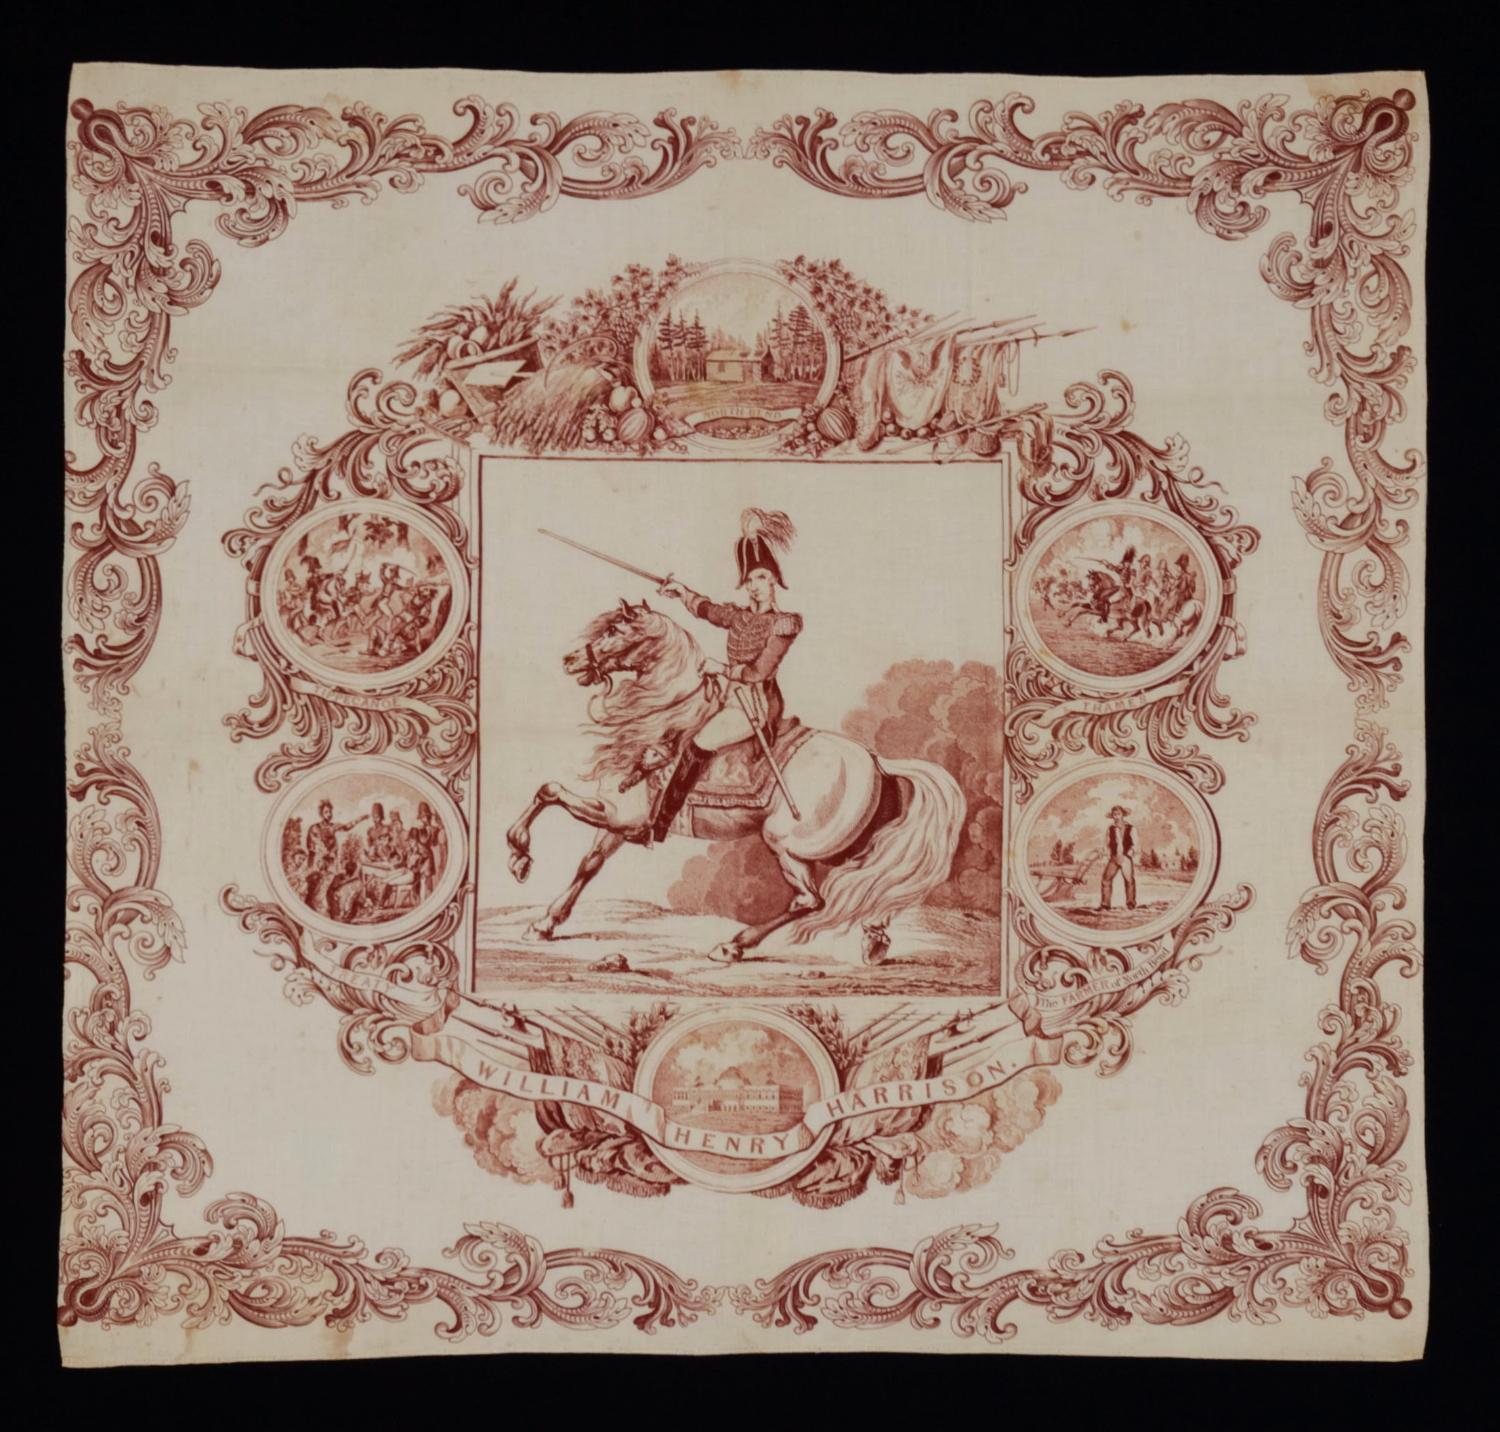 1840 campaign kerchief featuring an image of William Henry Harrison on horseback in military garb, one of the first known campaign textiles in early America

Printed in mulberry red ink on white cotton, this kerchief's central imagery includes a